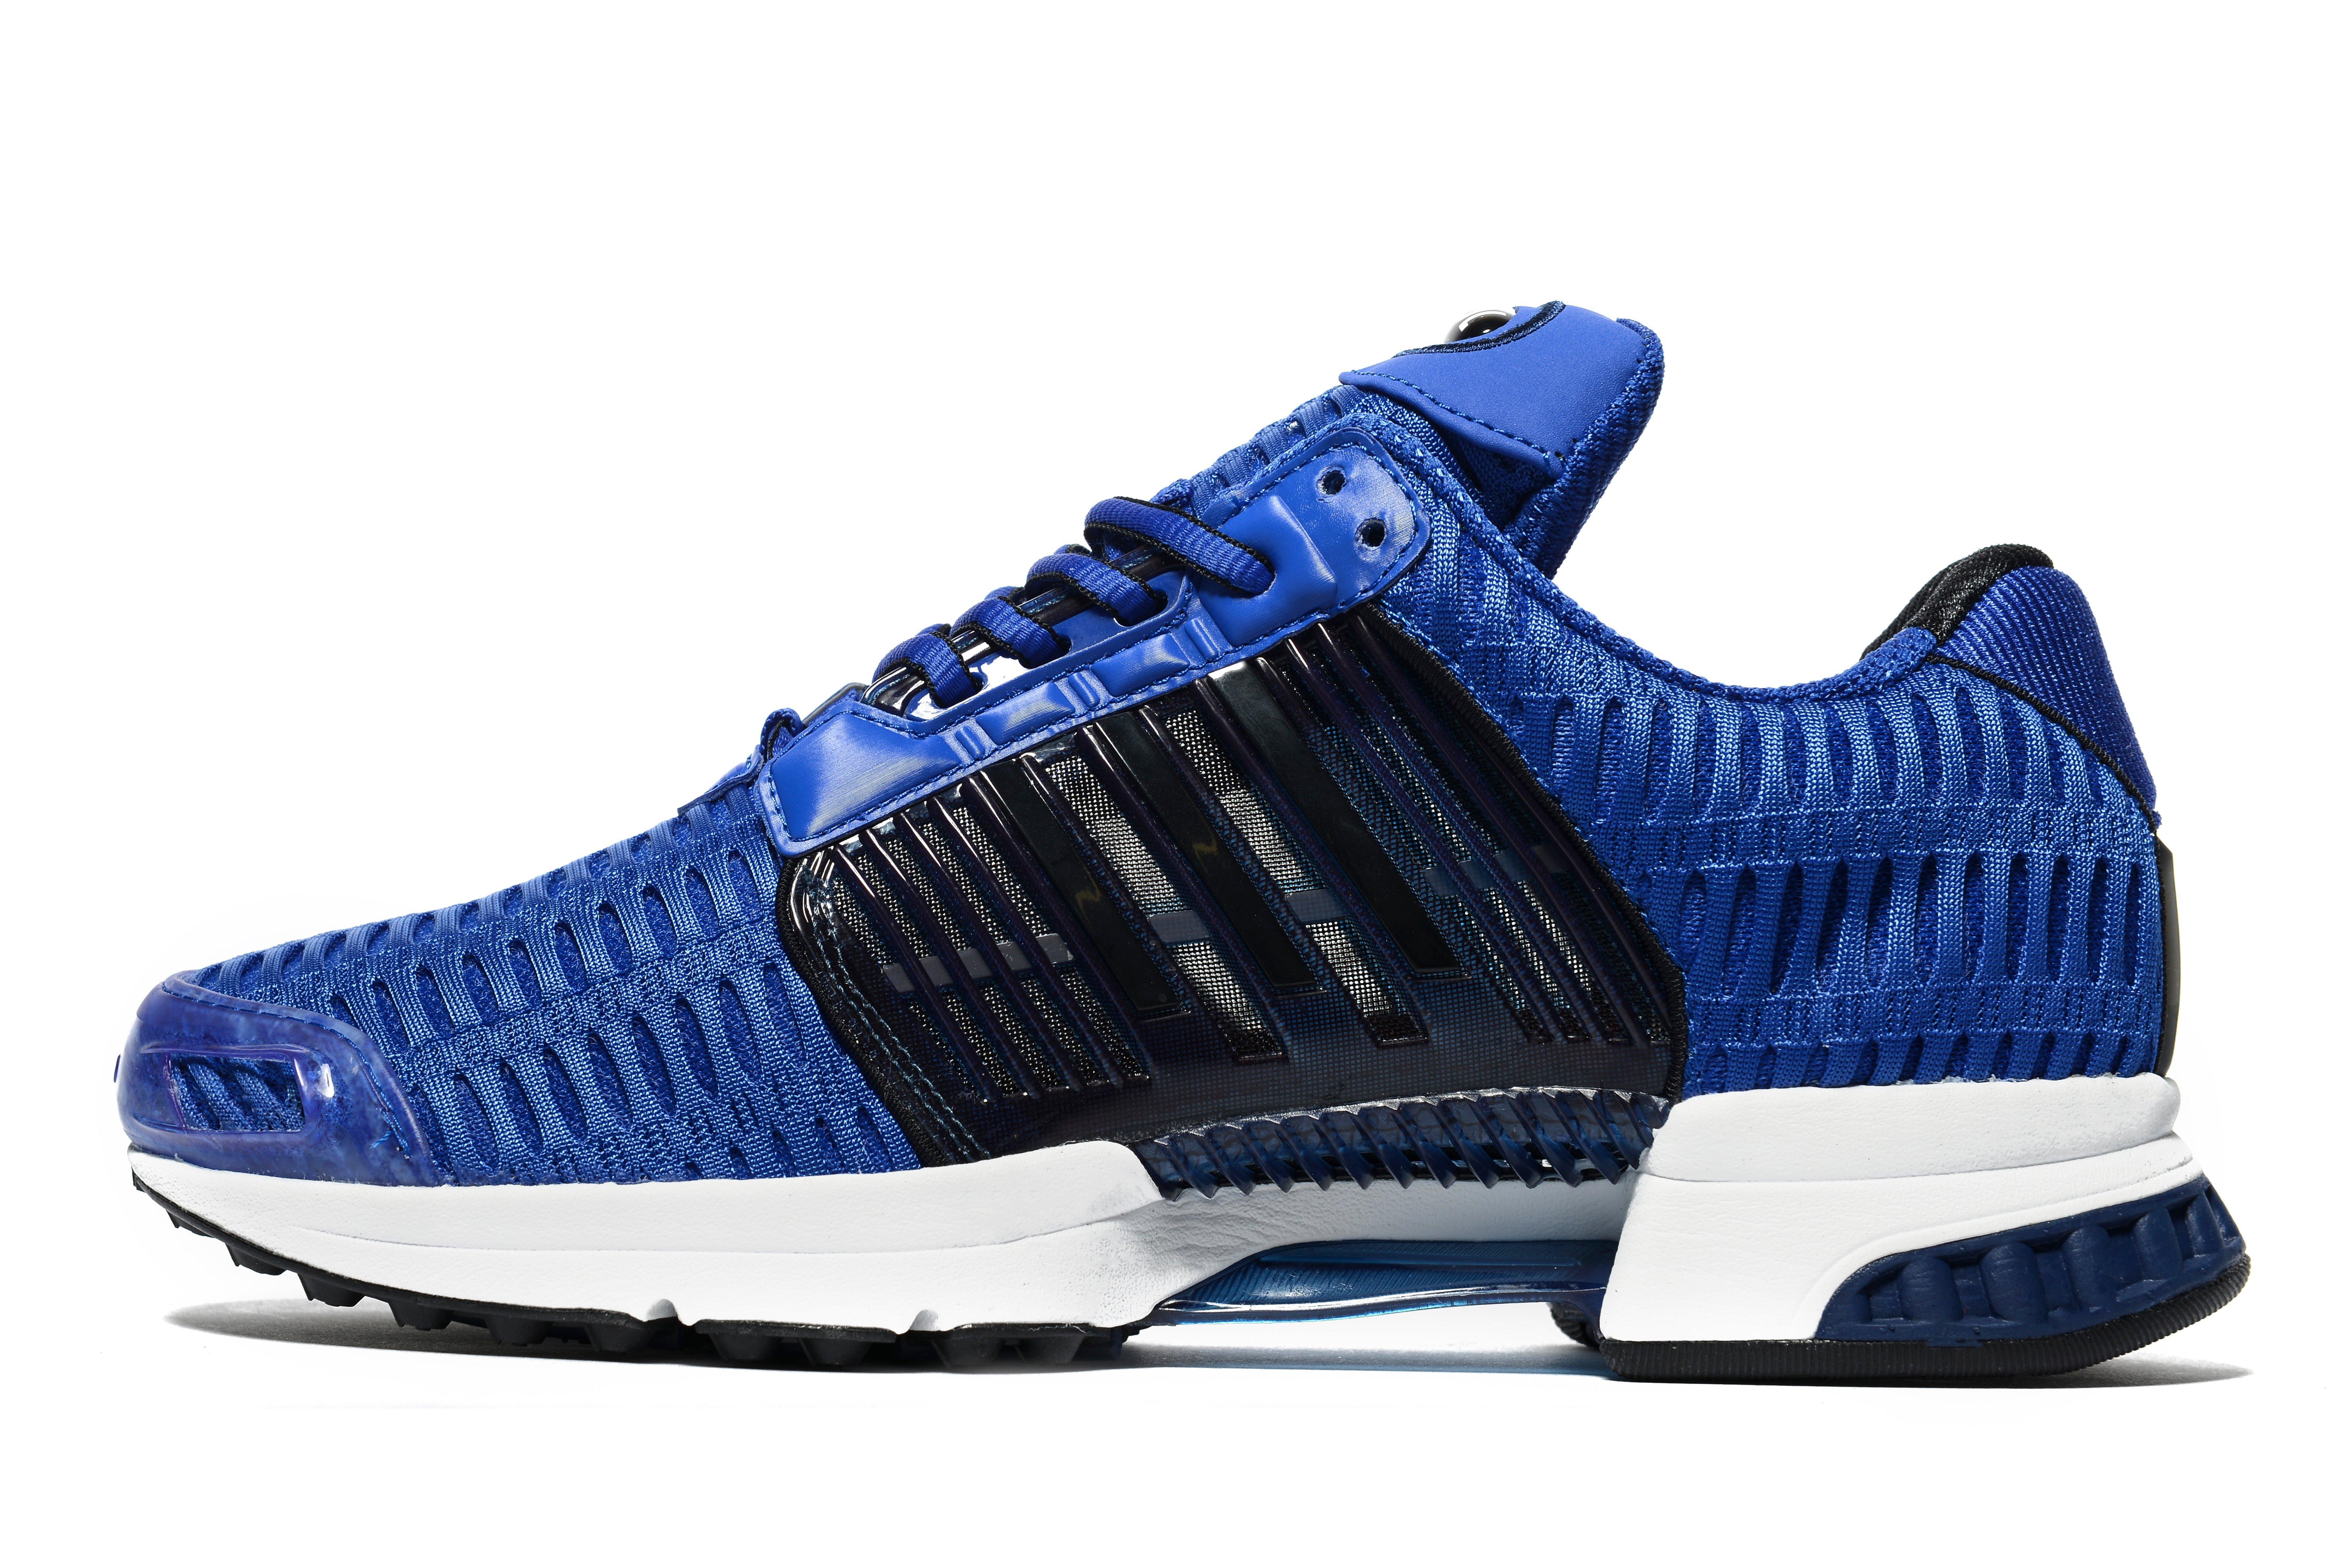 adidas Originals Synthetic Climacool 1 in Blue/Black (Blue) for Men - Lyst